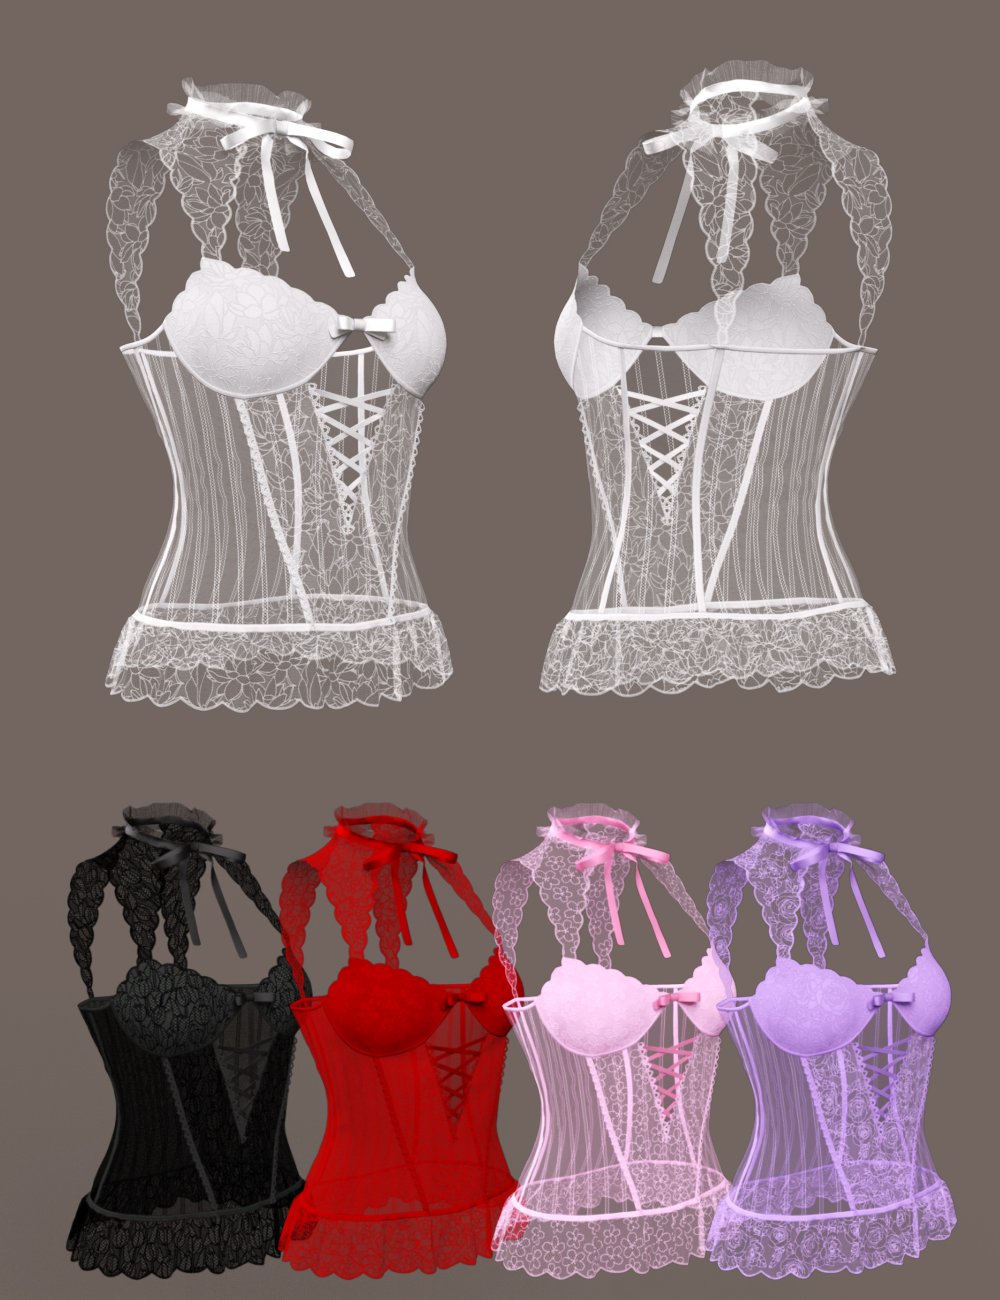 CNB Lace dForce Bustier for Genesis 8 and 8.1 Females